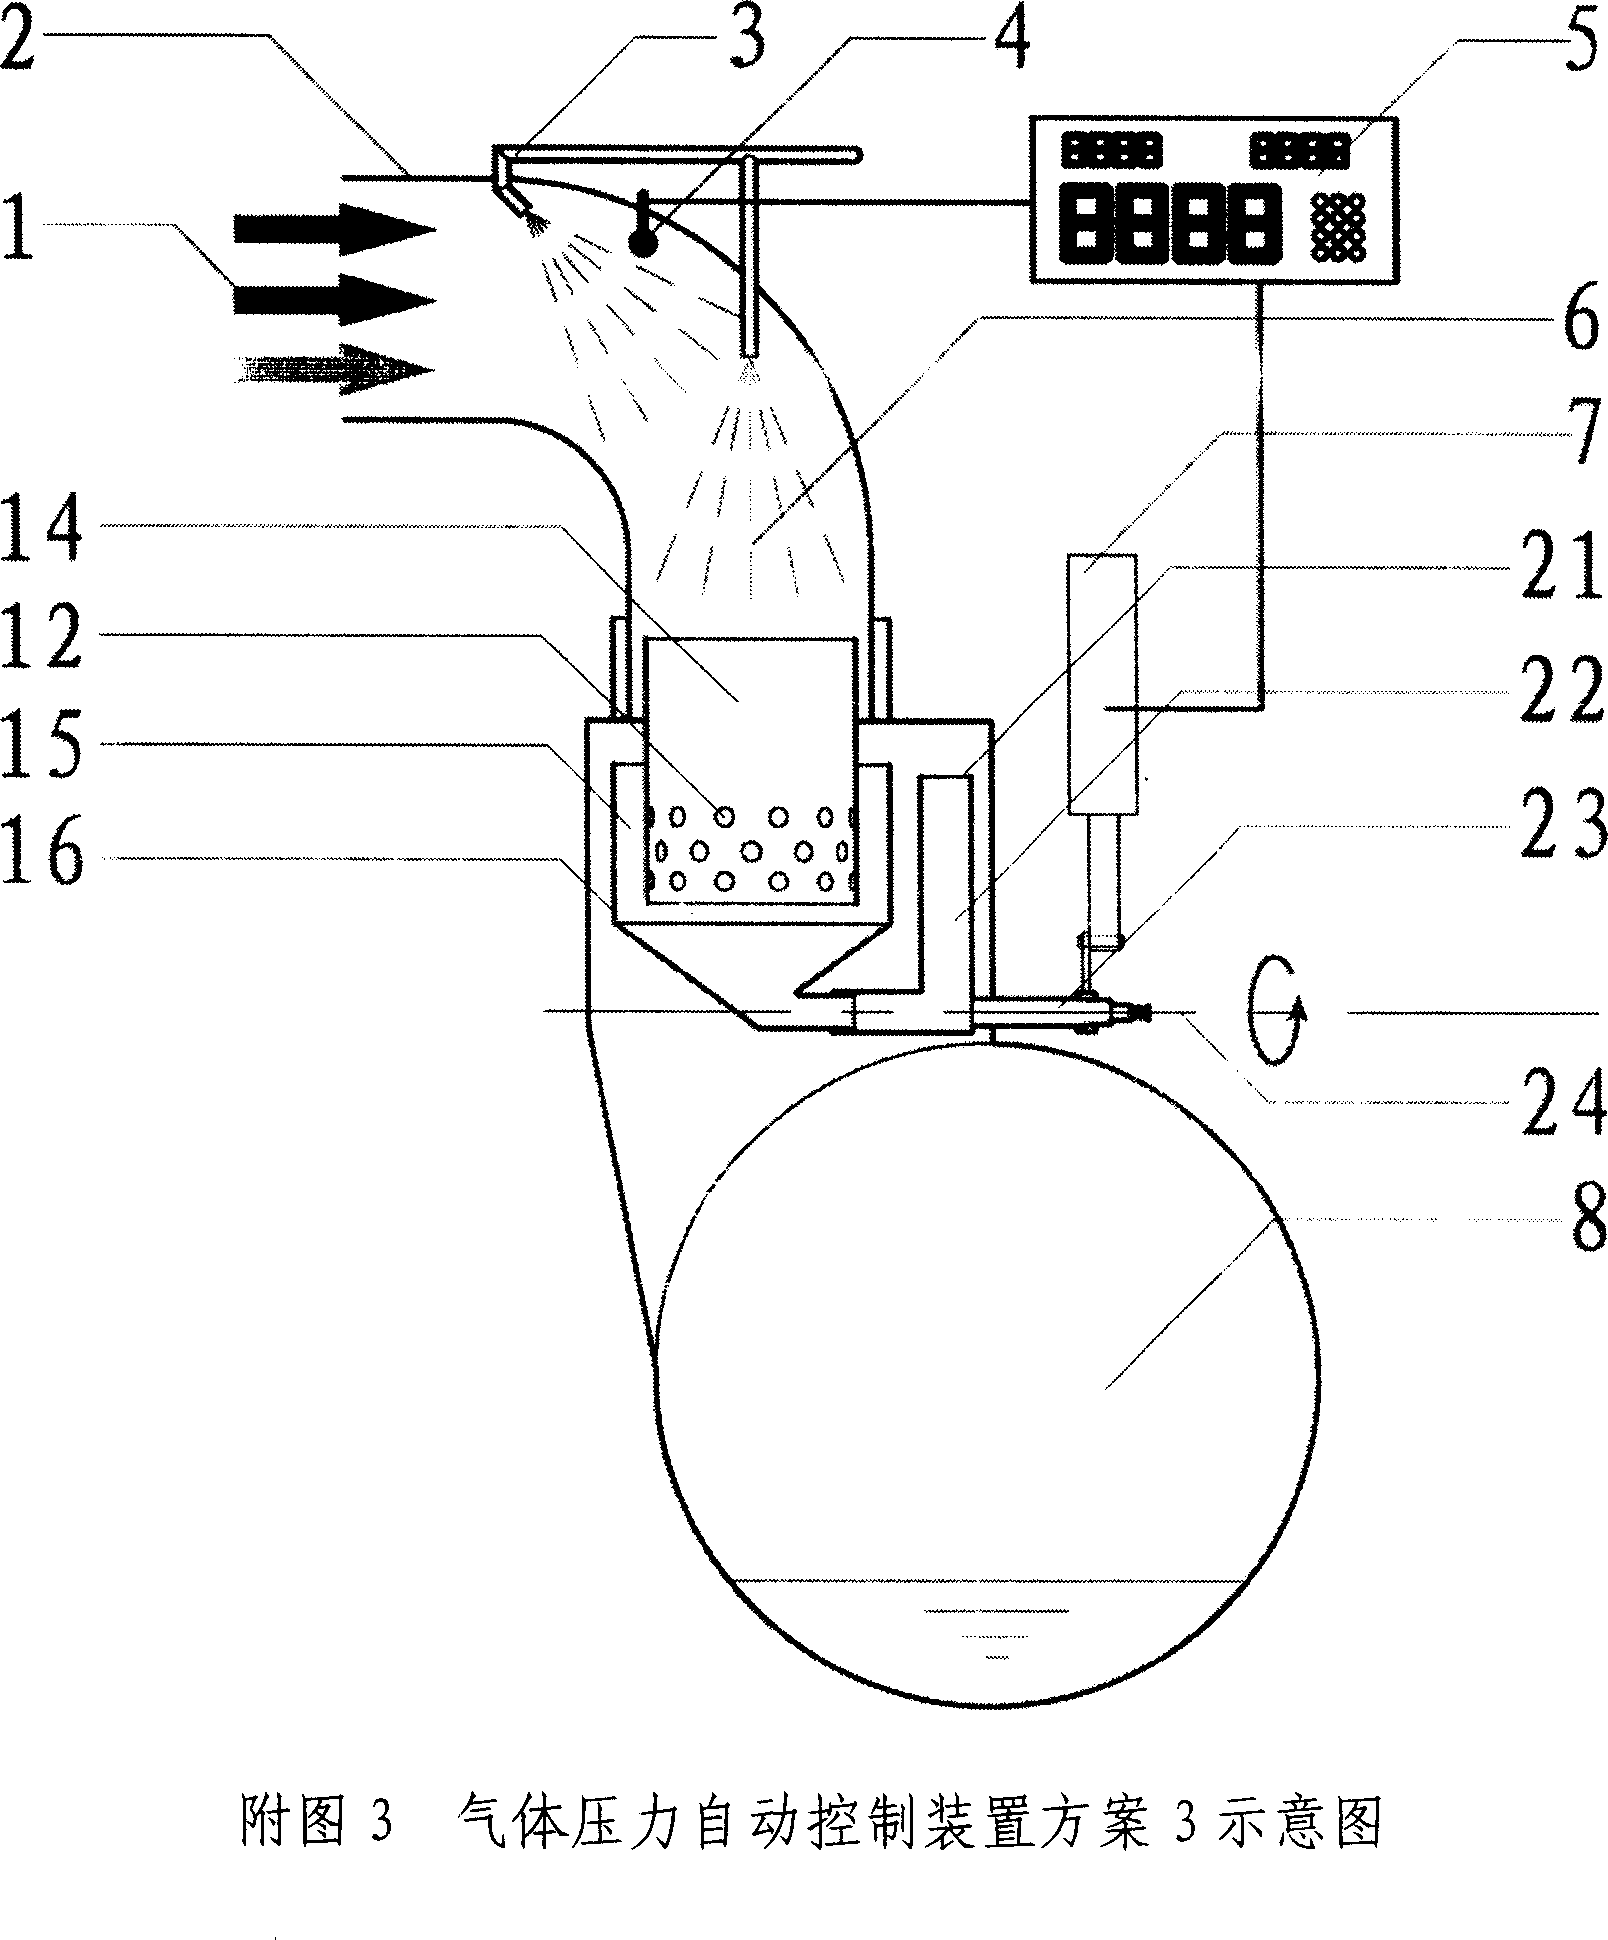 Automatic control device for gas pressure